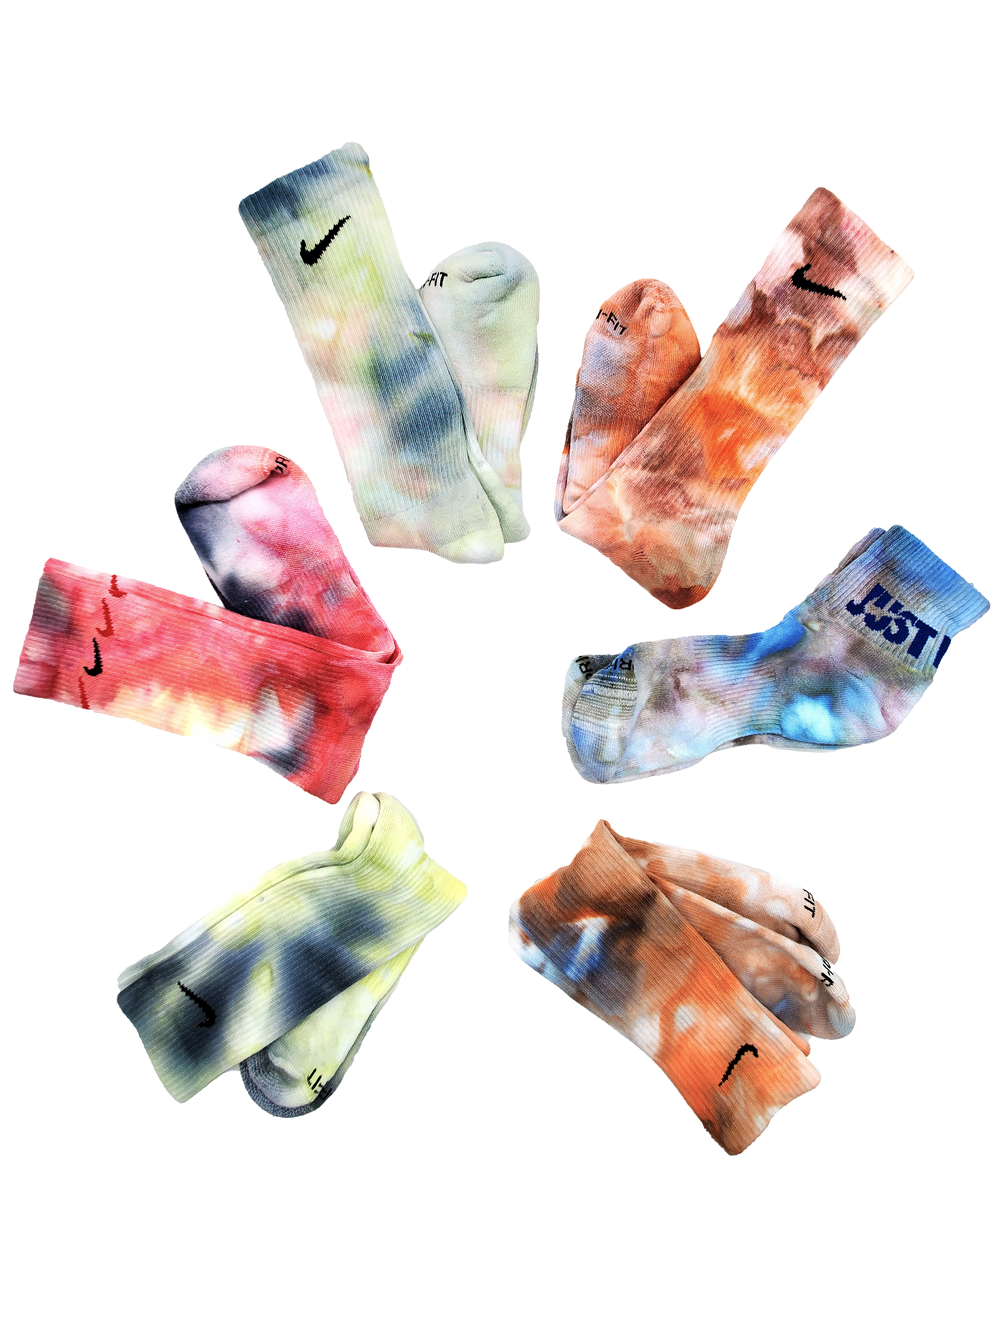 Hand Dyed Nike Socks - Ice Dyed Everyday Plus Limited Colors Tie Dye Crew Socks